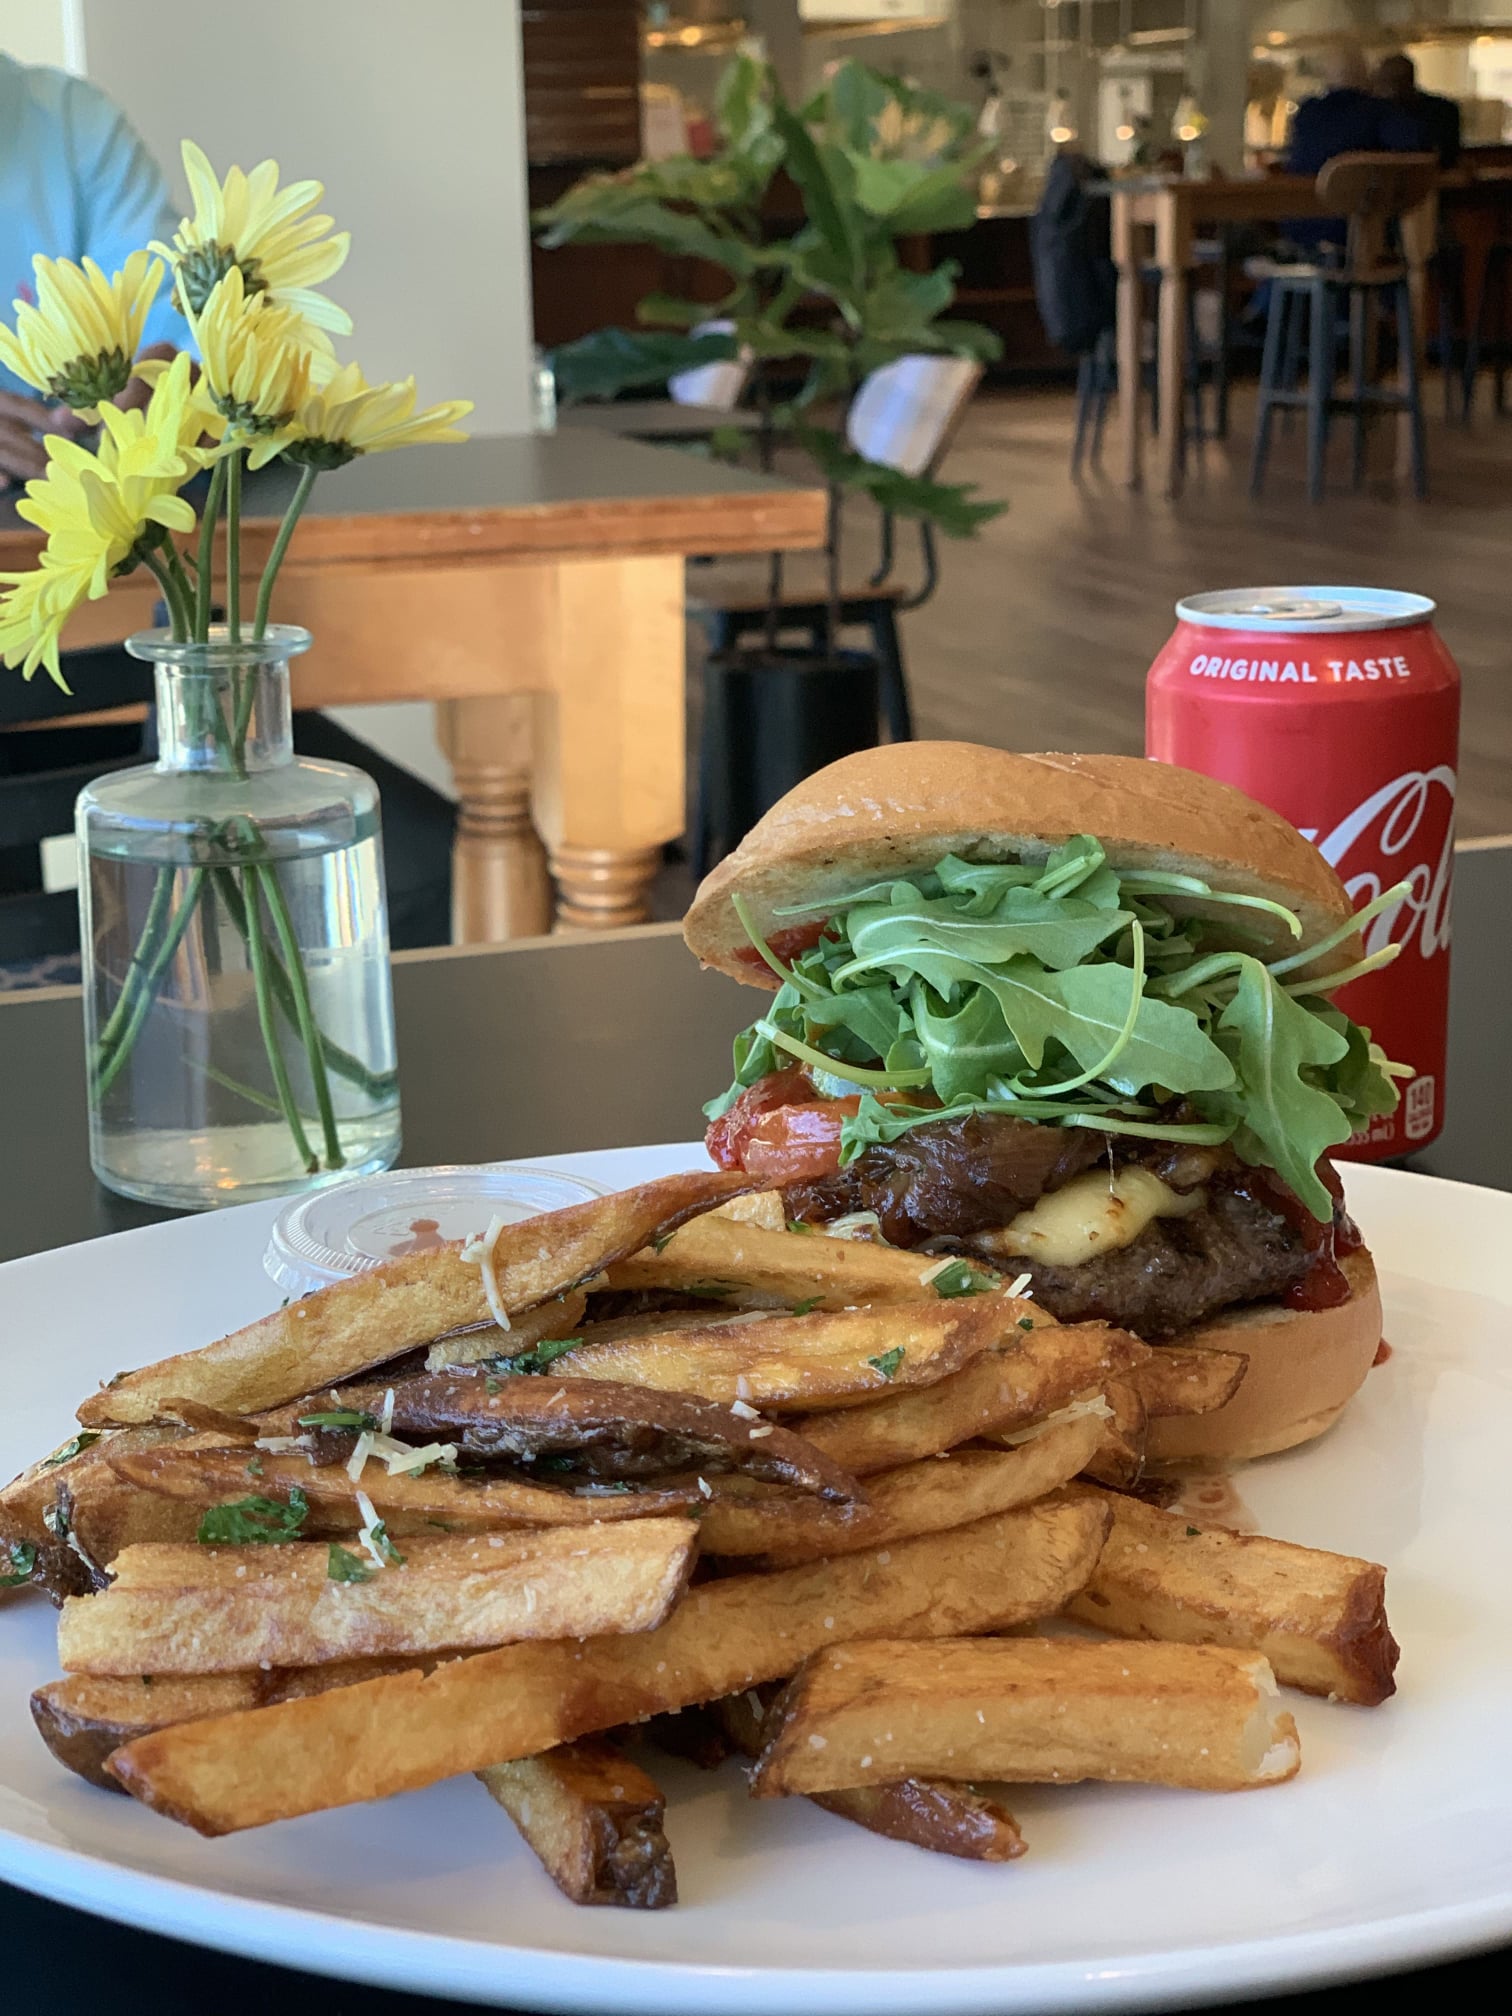 A double stack burger topped with leaf green arugula, smoked bacon, and cheese served with a side of steak fries. A red Coca Cola can sides beside the burger and fries with a clear vase with yellow daisies